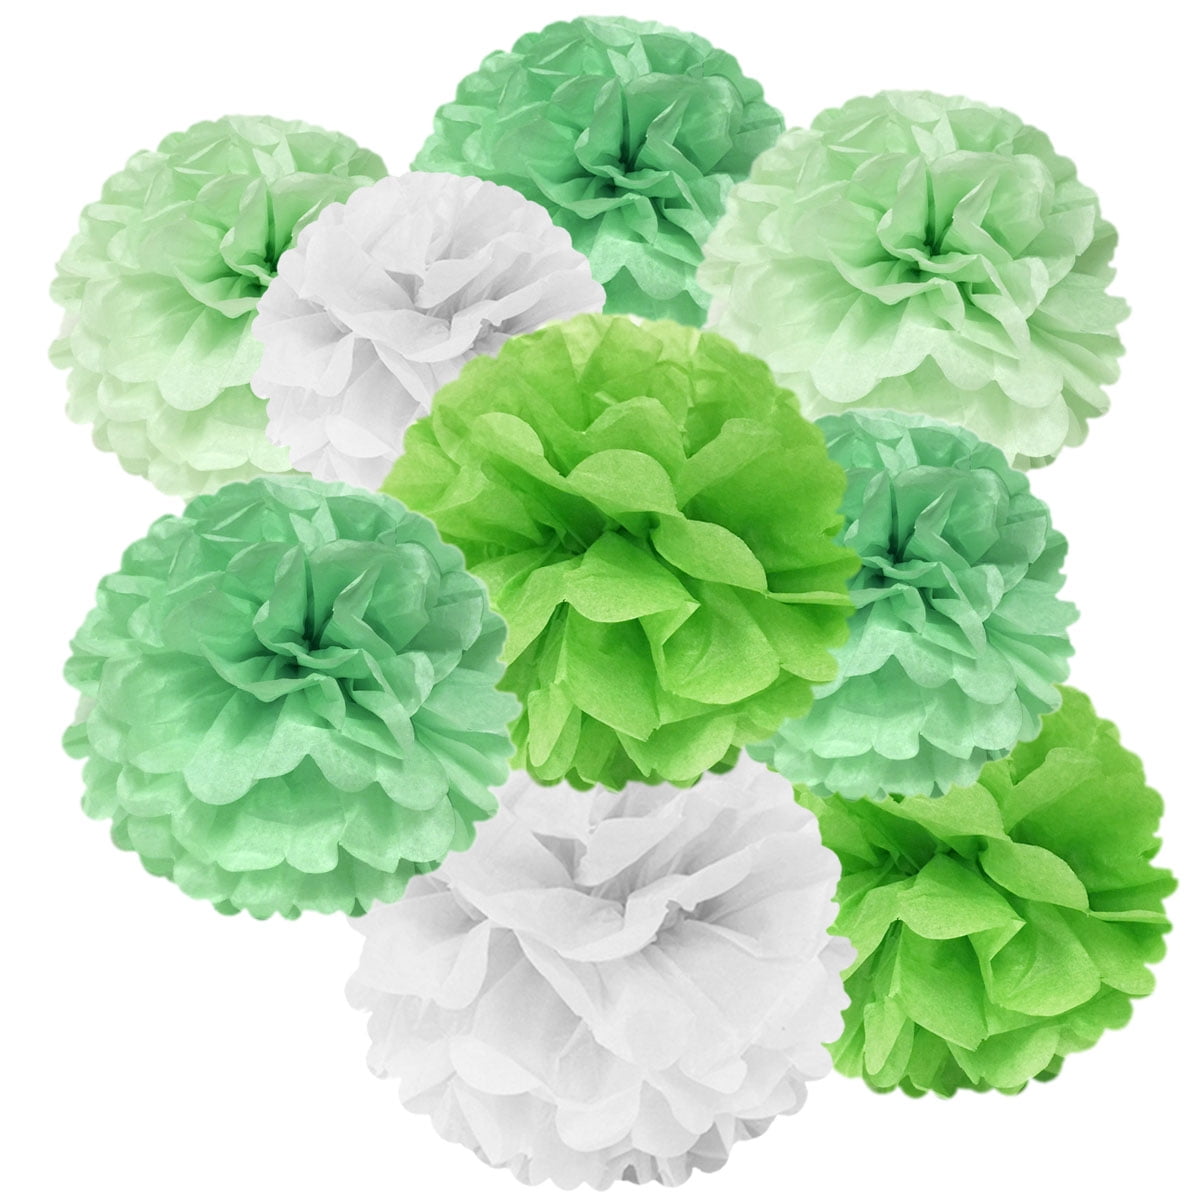 Details about   Tissue Pom Poms Paper Home Wedding Birthday Party Champagne Decorations pompoms